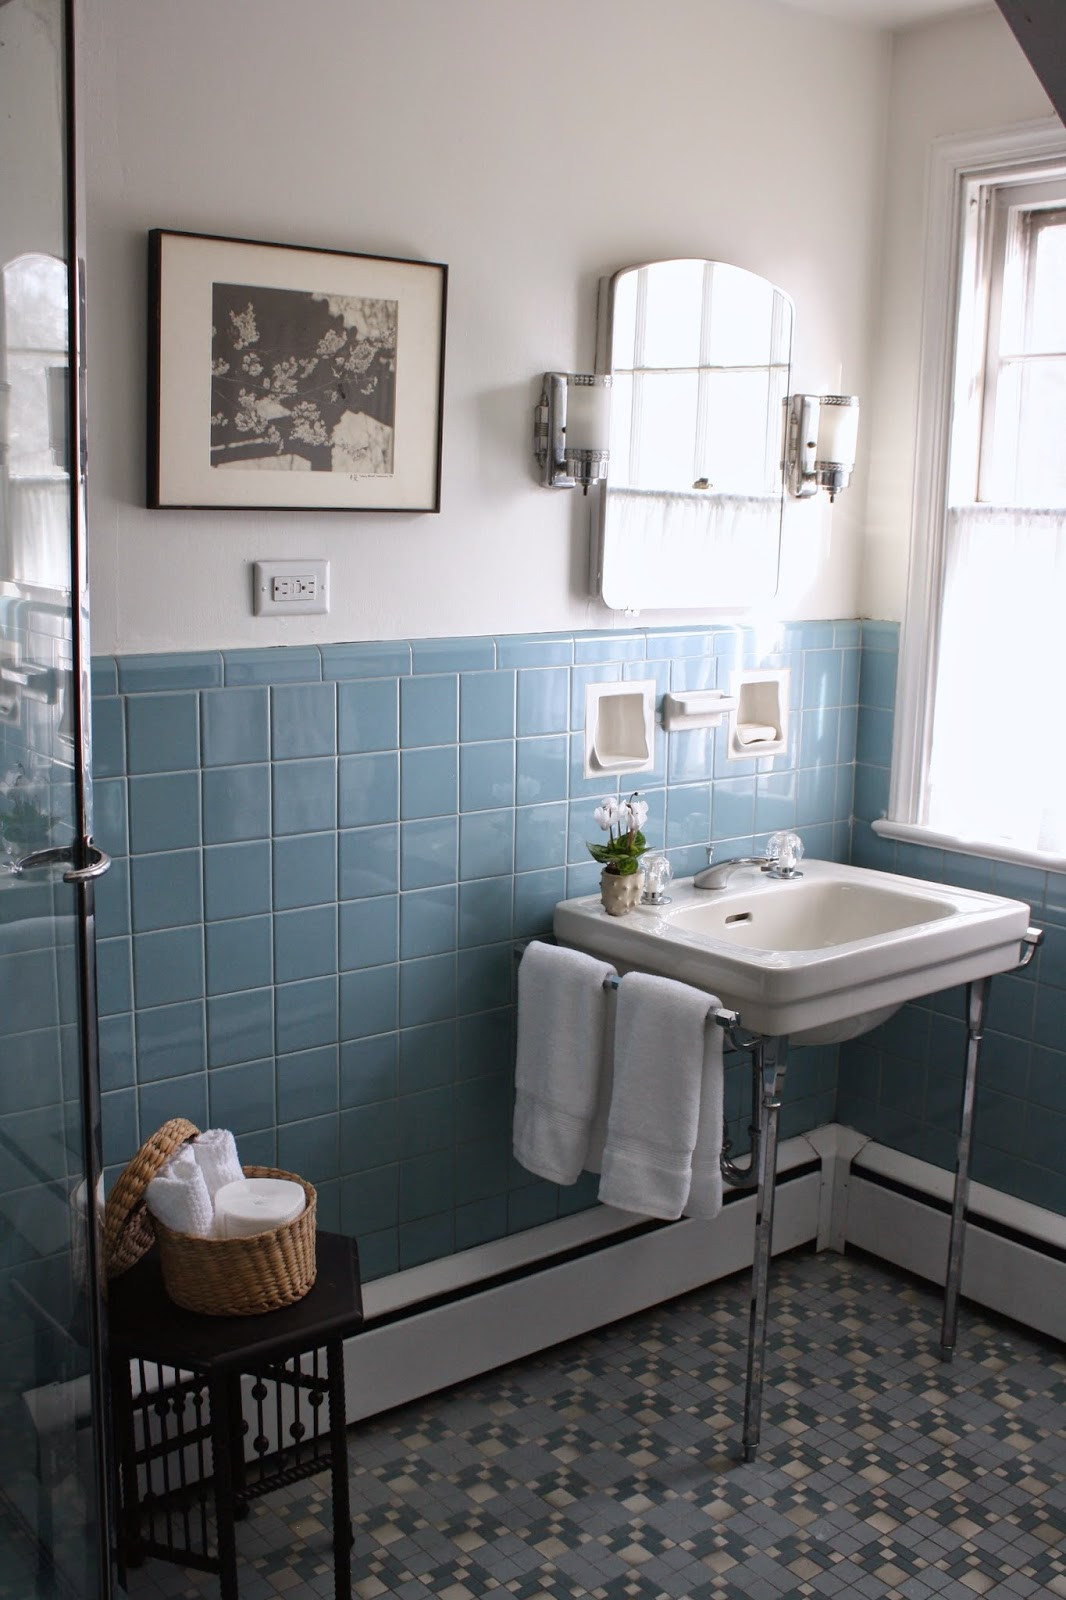 Covering Old Bathroom Tiles
 36 nice ideas and pictures of vintage bathroom tile design